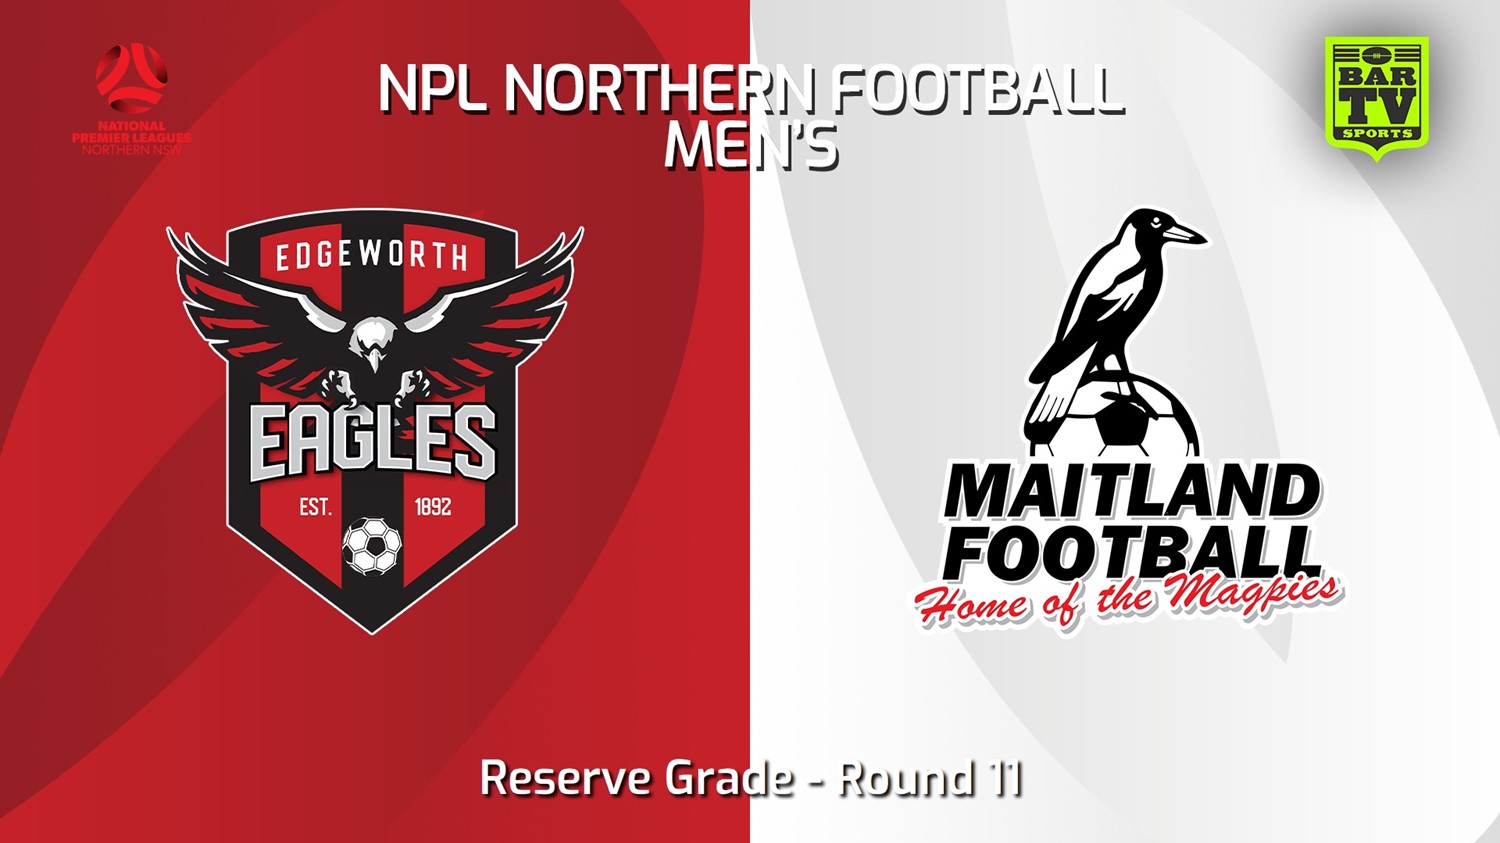 240619-video-NNSW NPLM Res Round 11 - Edgeworth Eagles Res v Maitland FC Res Minigame Slate Image